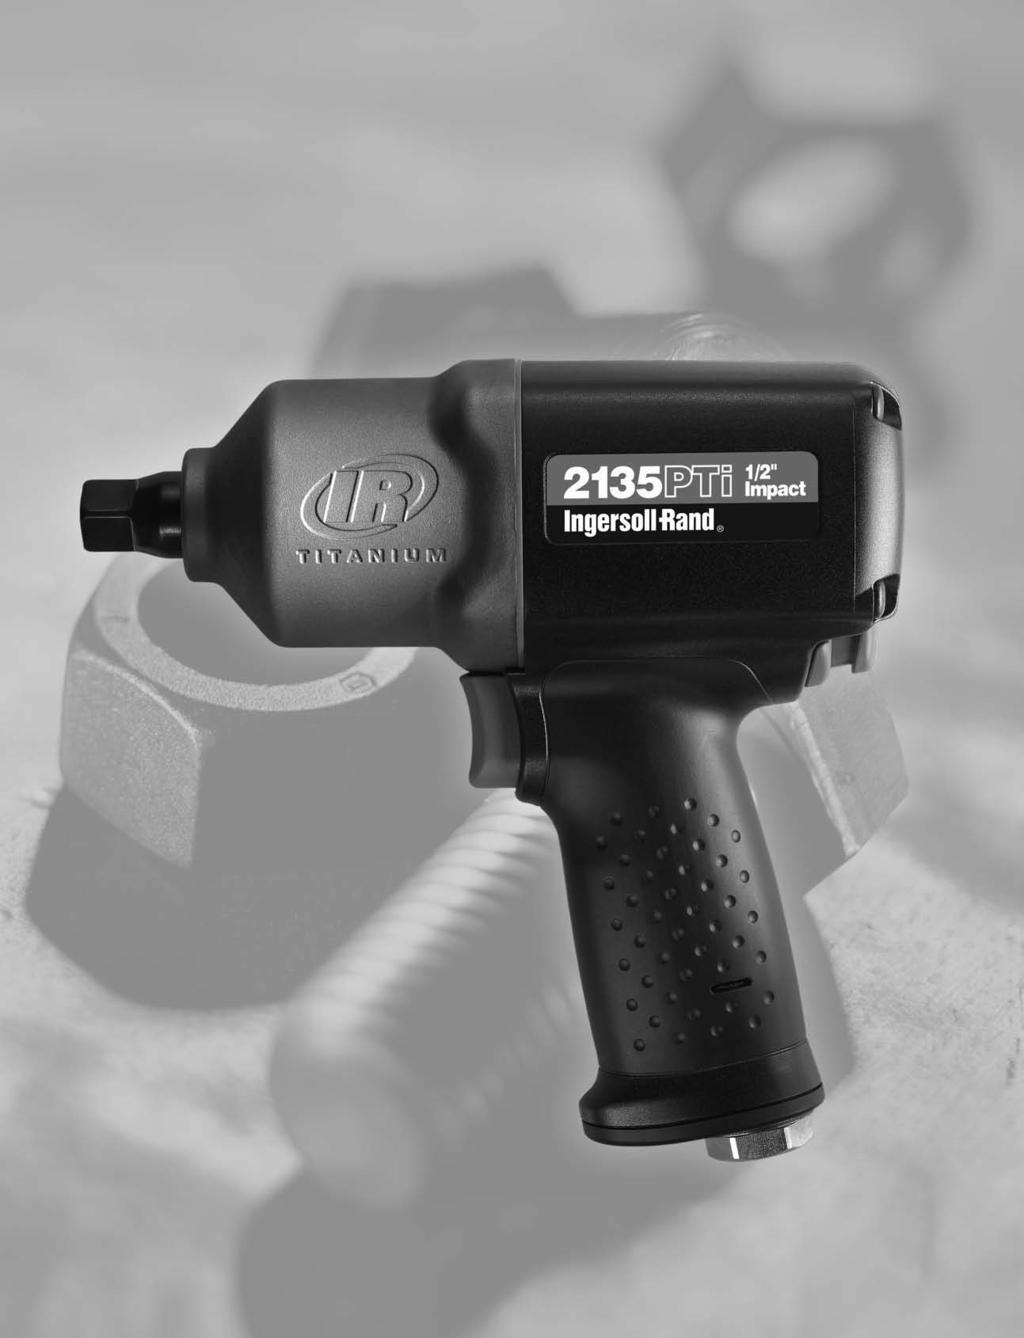 from the Leader in Impact Tools. 1000 ft.-lbs. of Nut Busting Torque in a tool weighing just 3.9 lbs.